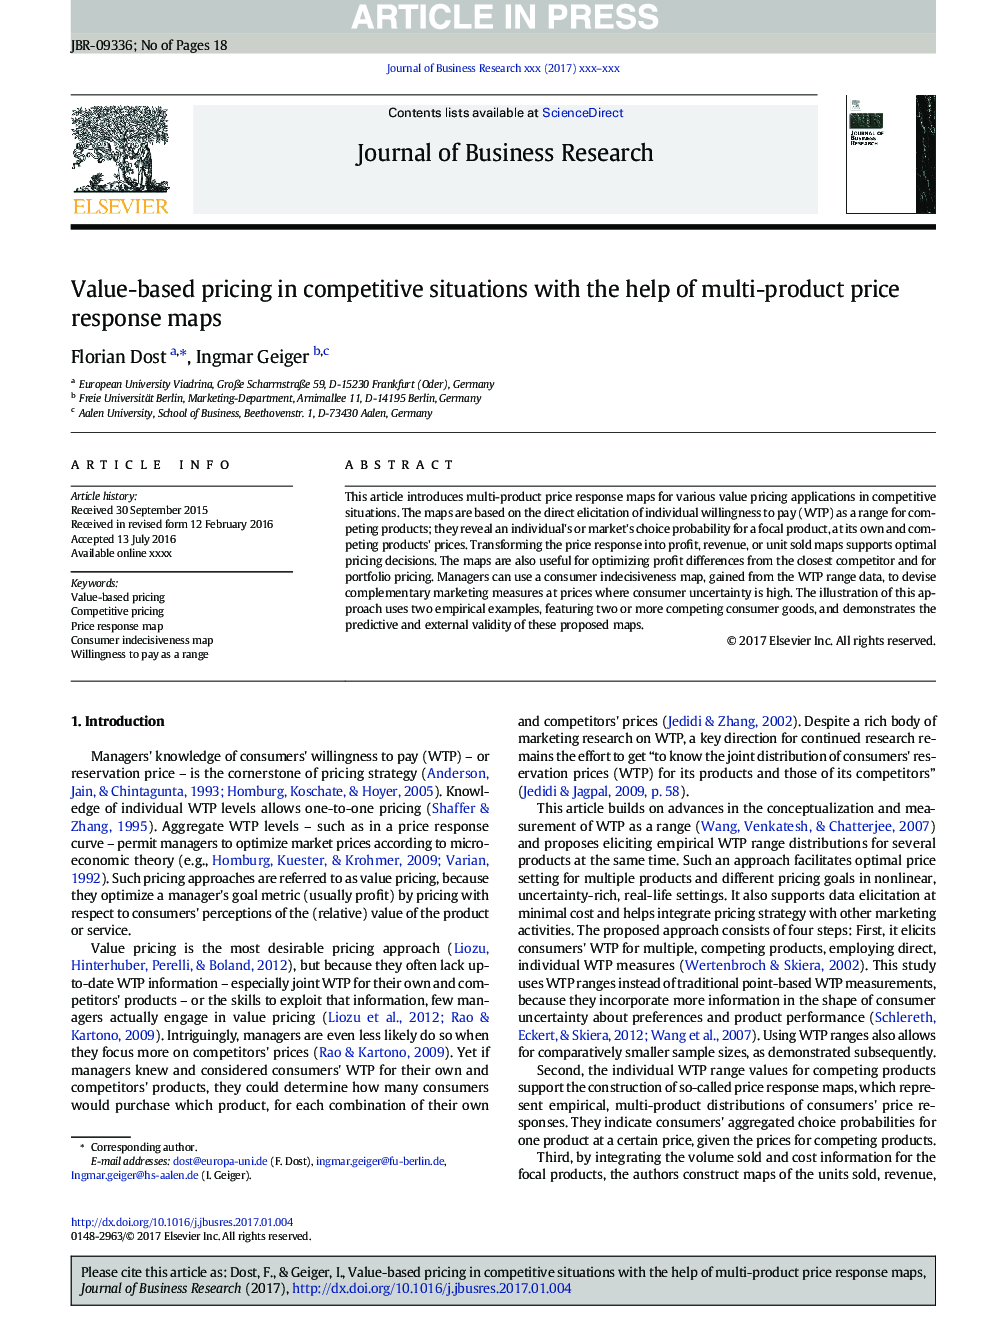 Value-based pricing in competitive situations with the help of multi-product price response maps